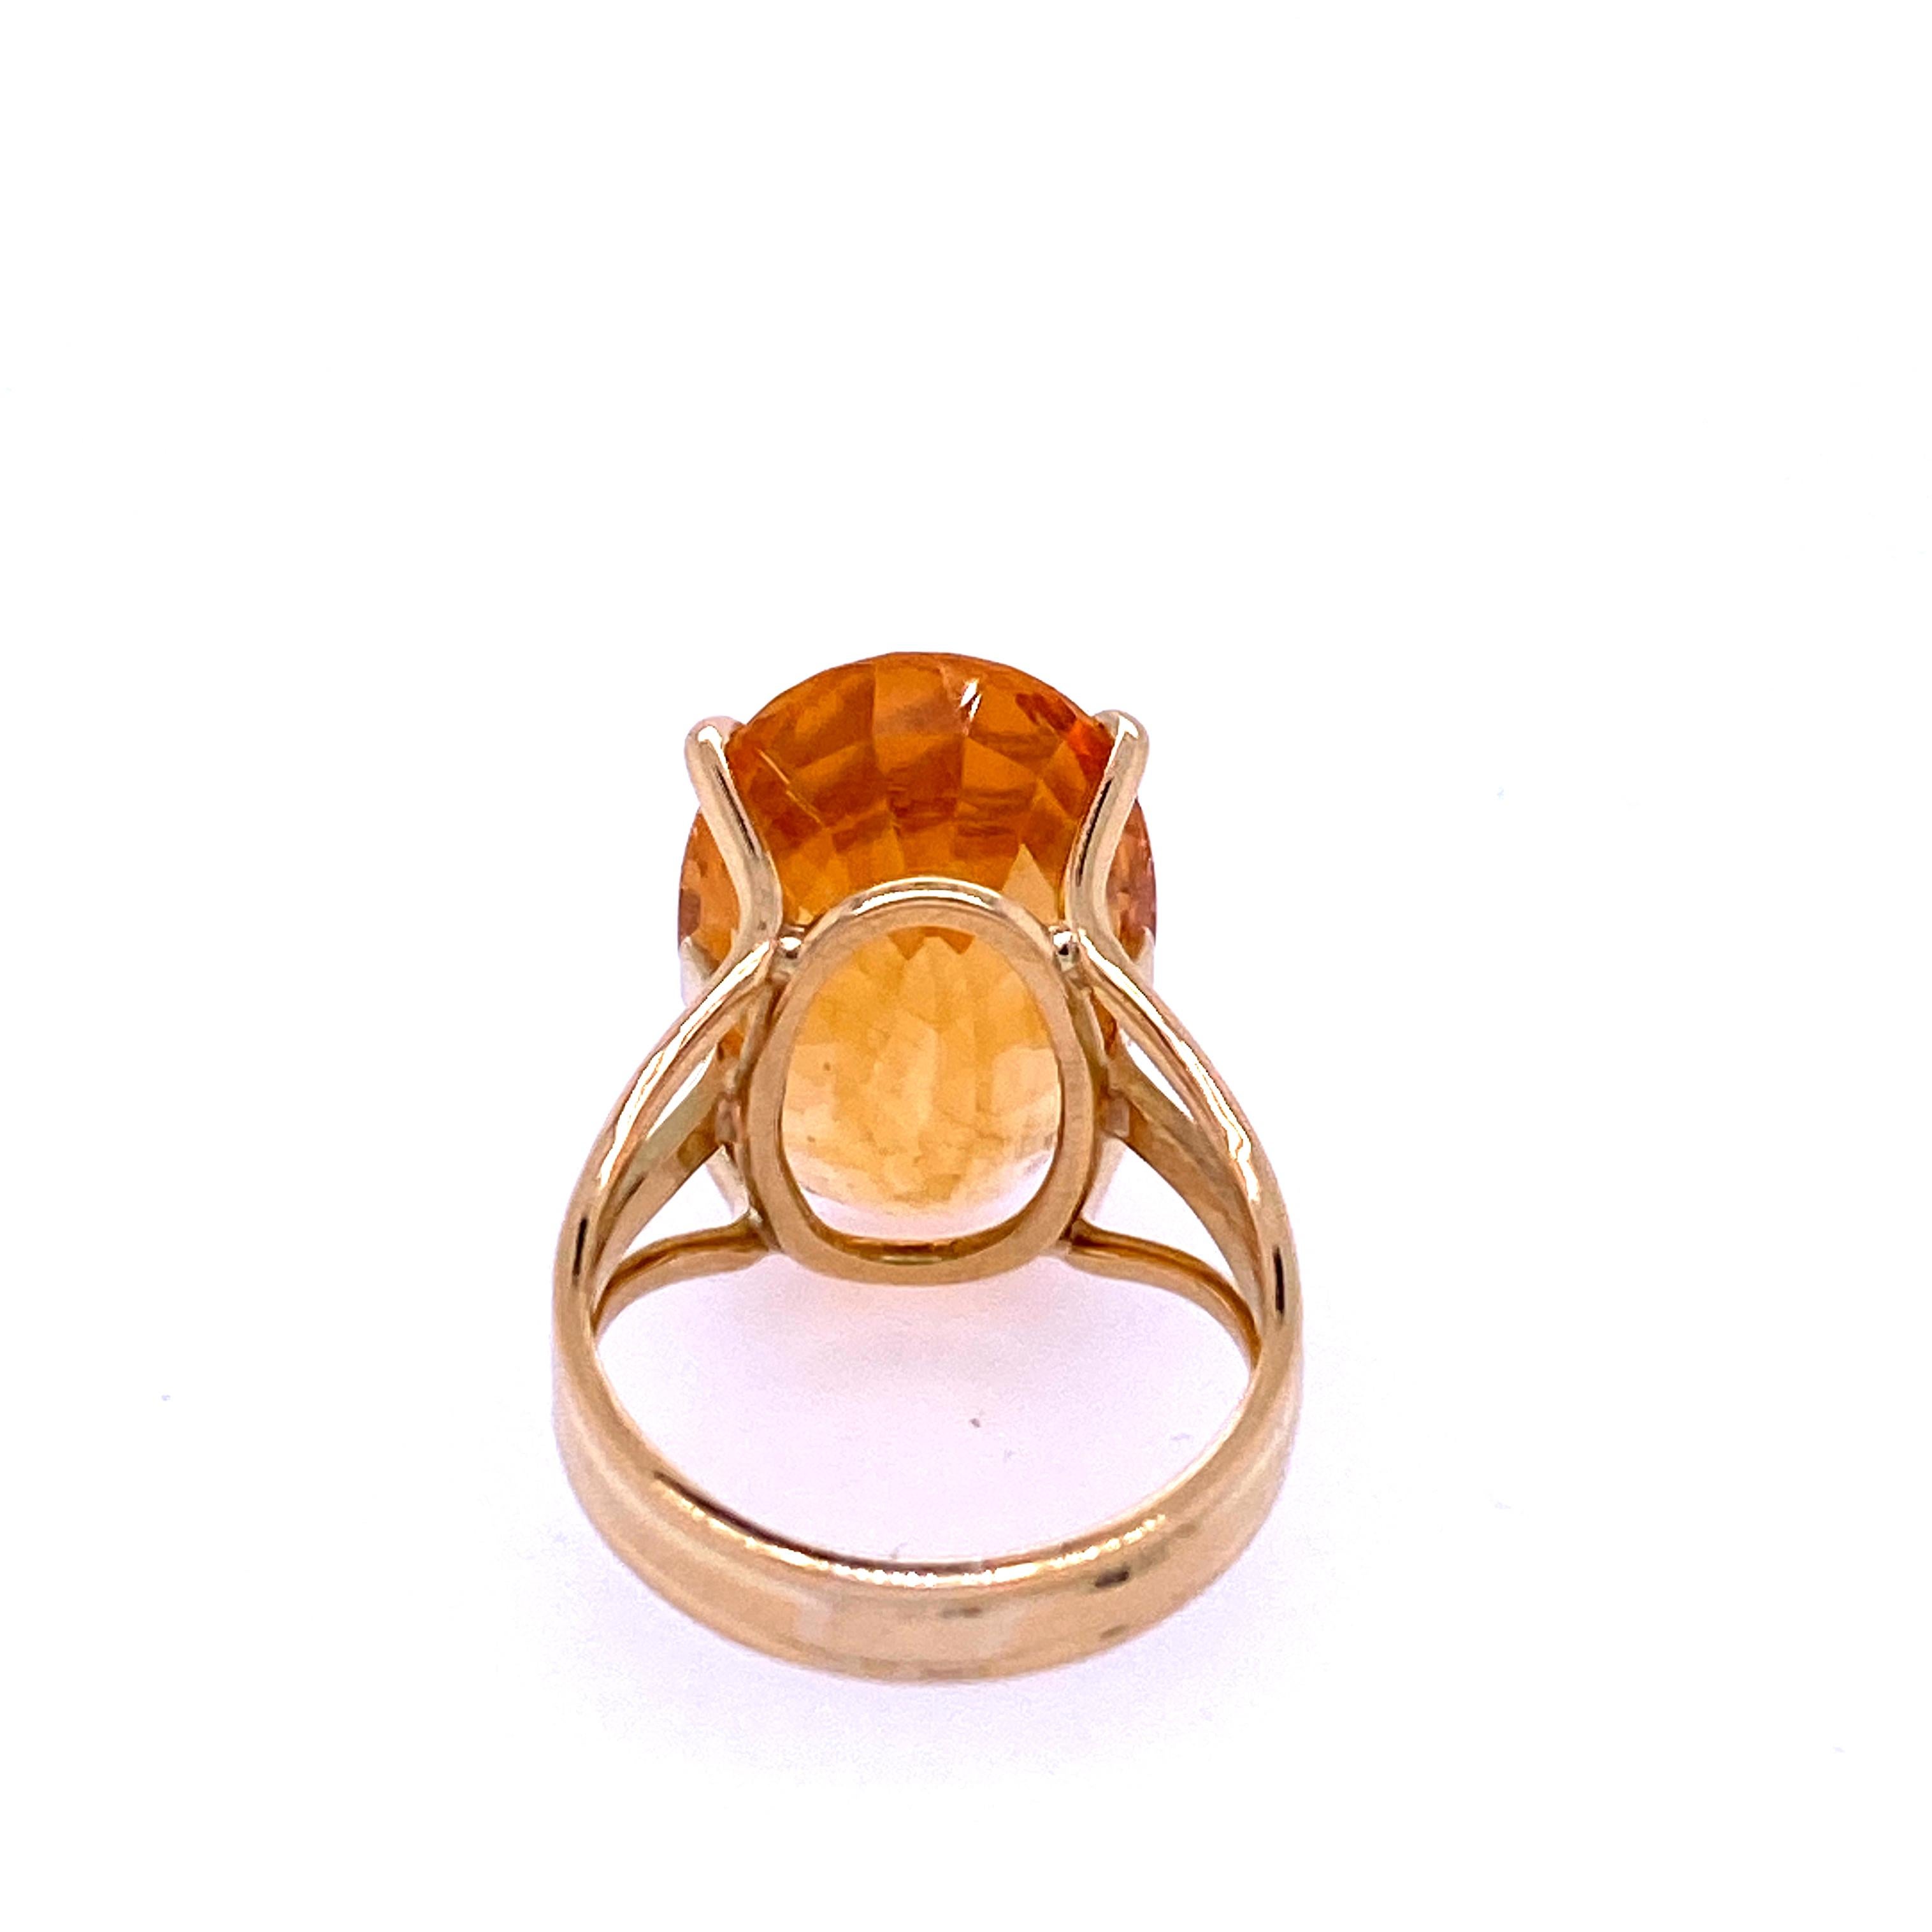 One 18 karat yellow gold (stamped 750) ring set with one 20.08 x 13.4mm oval golden citrine in a triple shak design.  The shank measures 11mm near the top of the ring and tapers to 4mm at the base.  The ring is a finger size 6.75. Circa 1970s